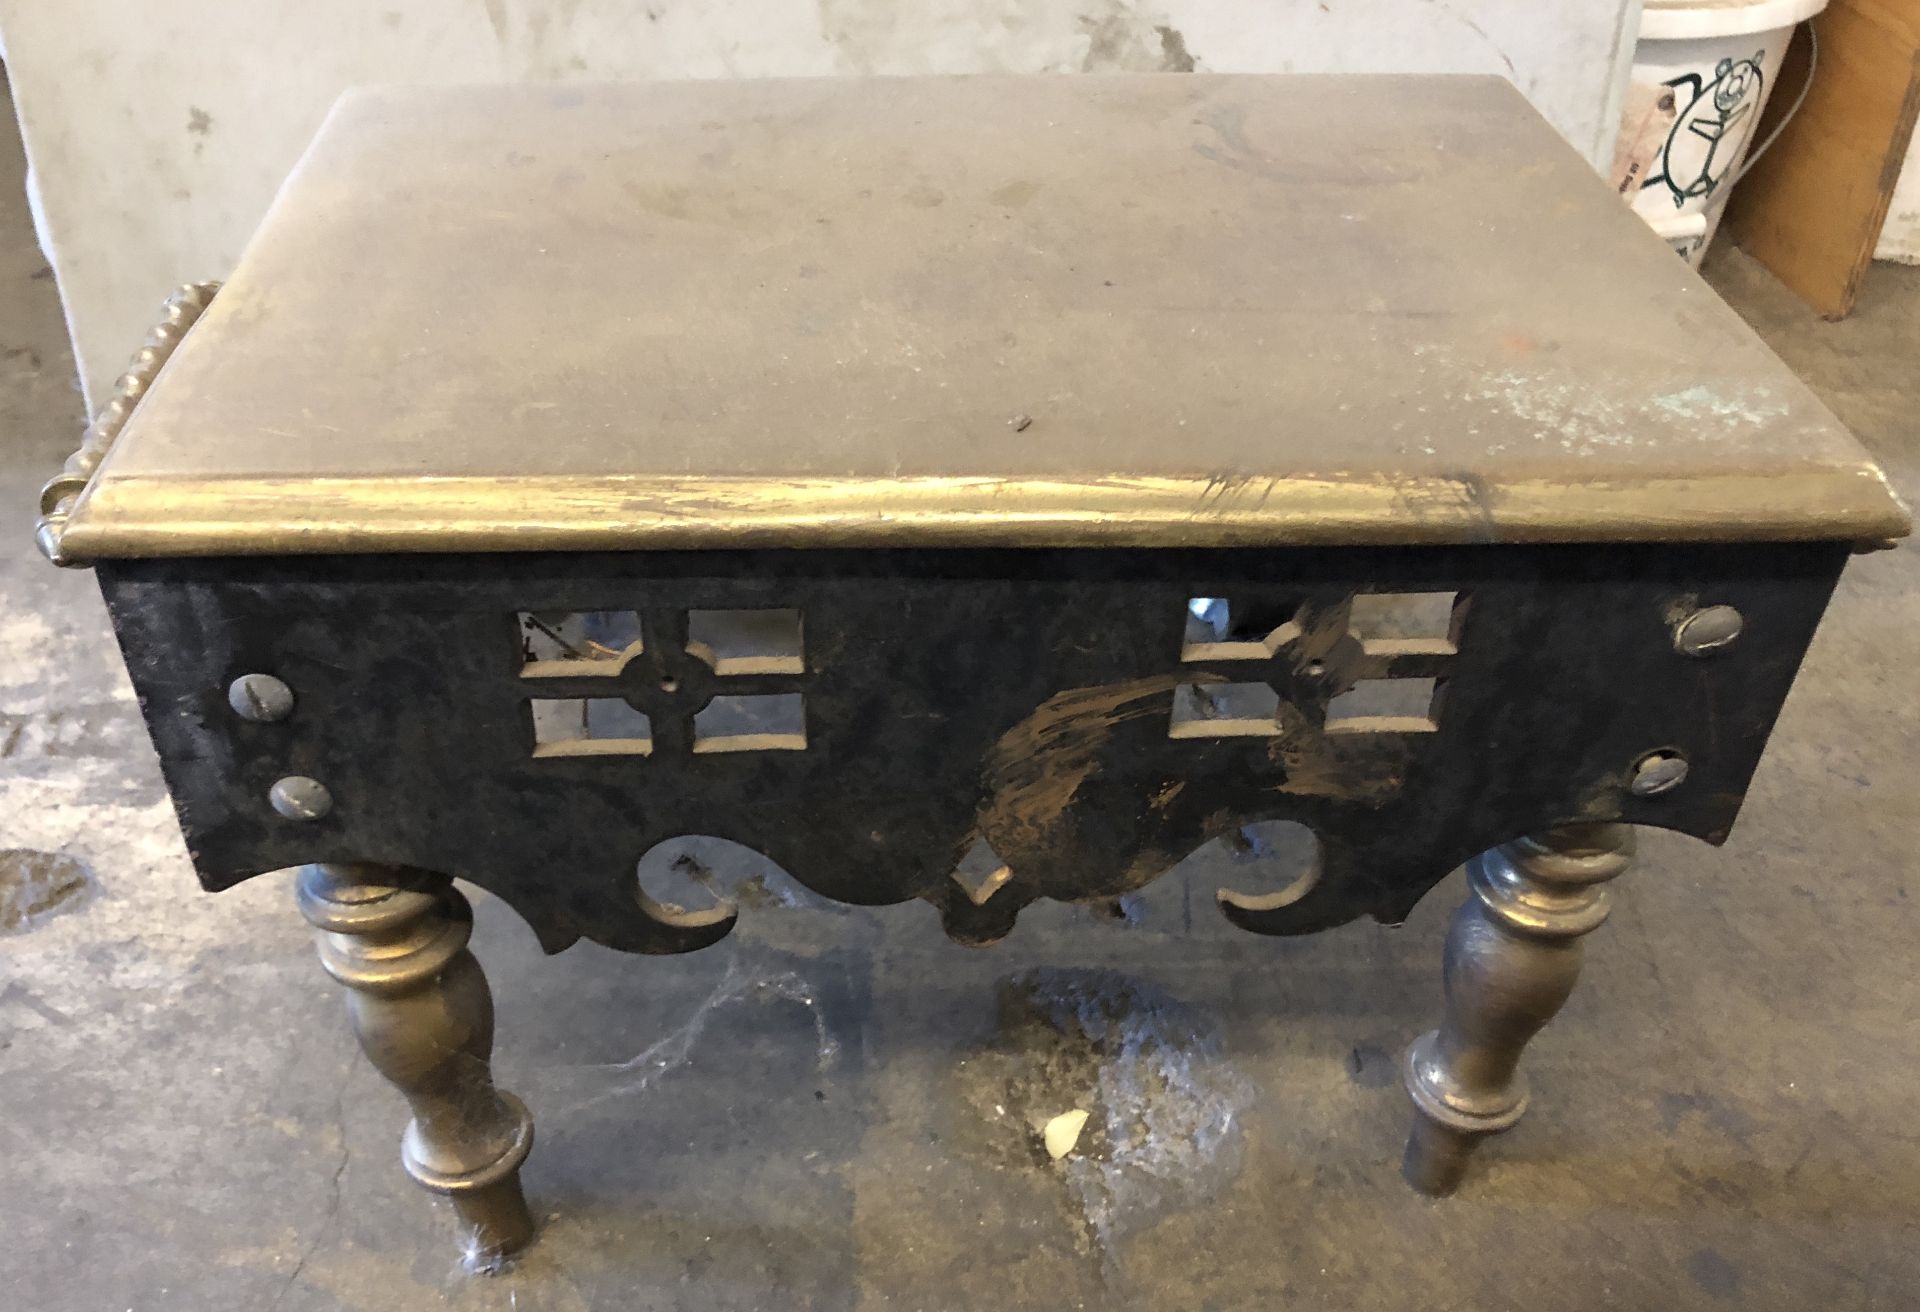 ANTIQUE FOOT STOOL FOR FIREPLACE VALUED AT $1000 - Image 3 of 4